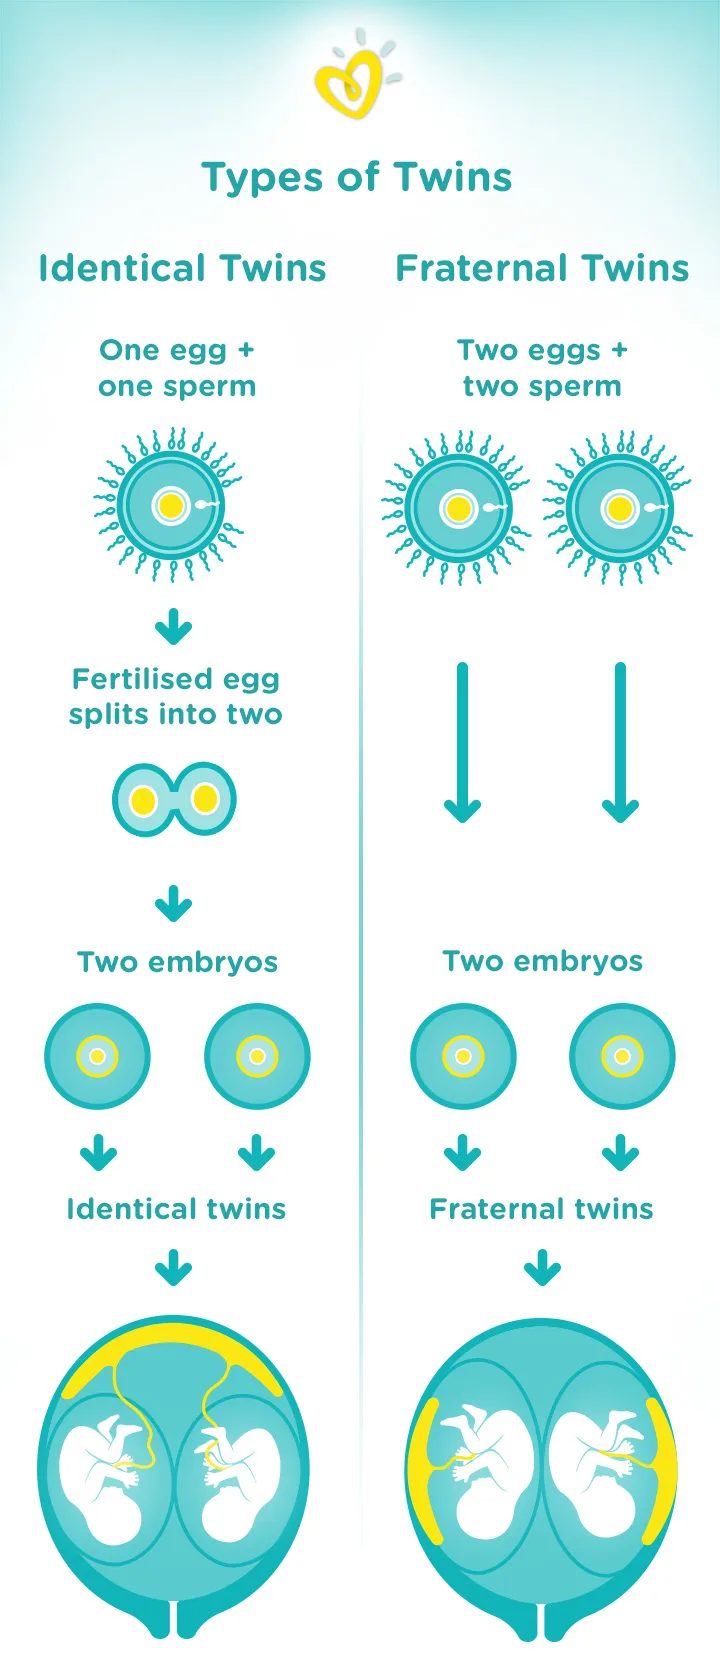 Types of Twins – identical vs fraternal